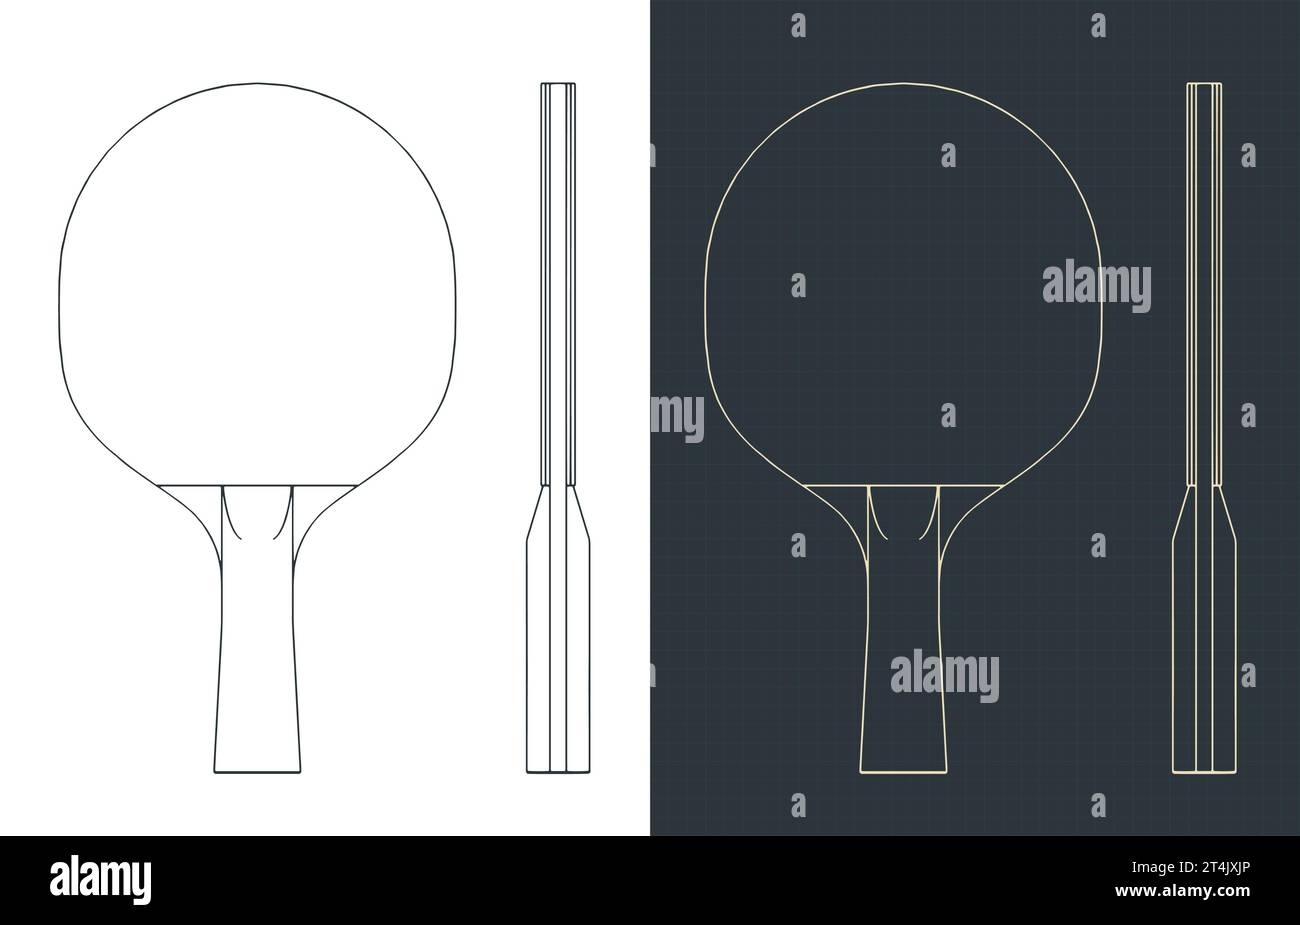 Stylized vector illustrations of  blueprints of table tennis racket Stock Vector